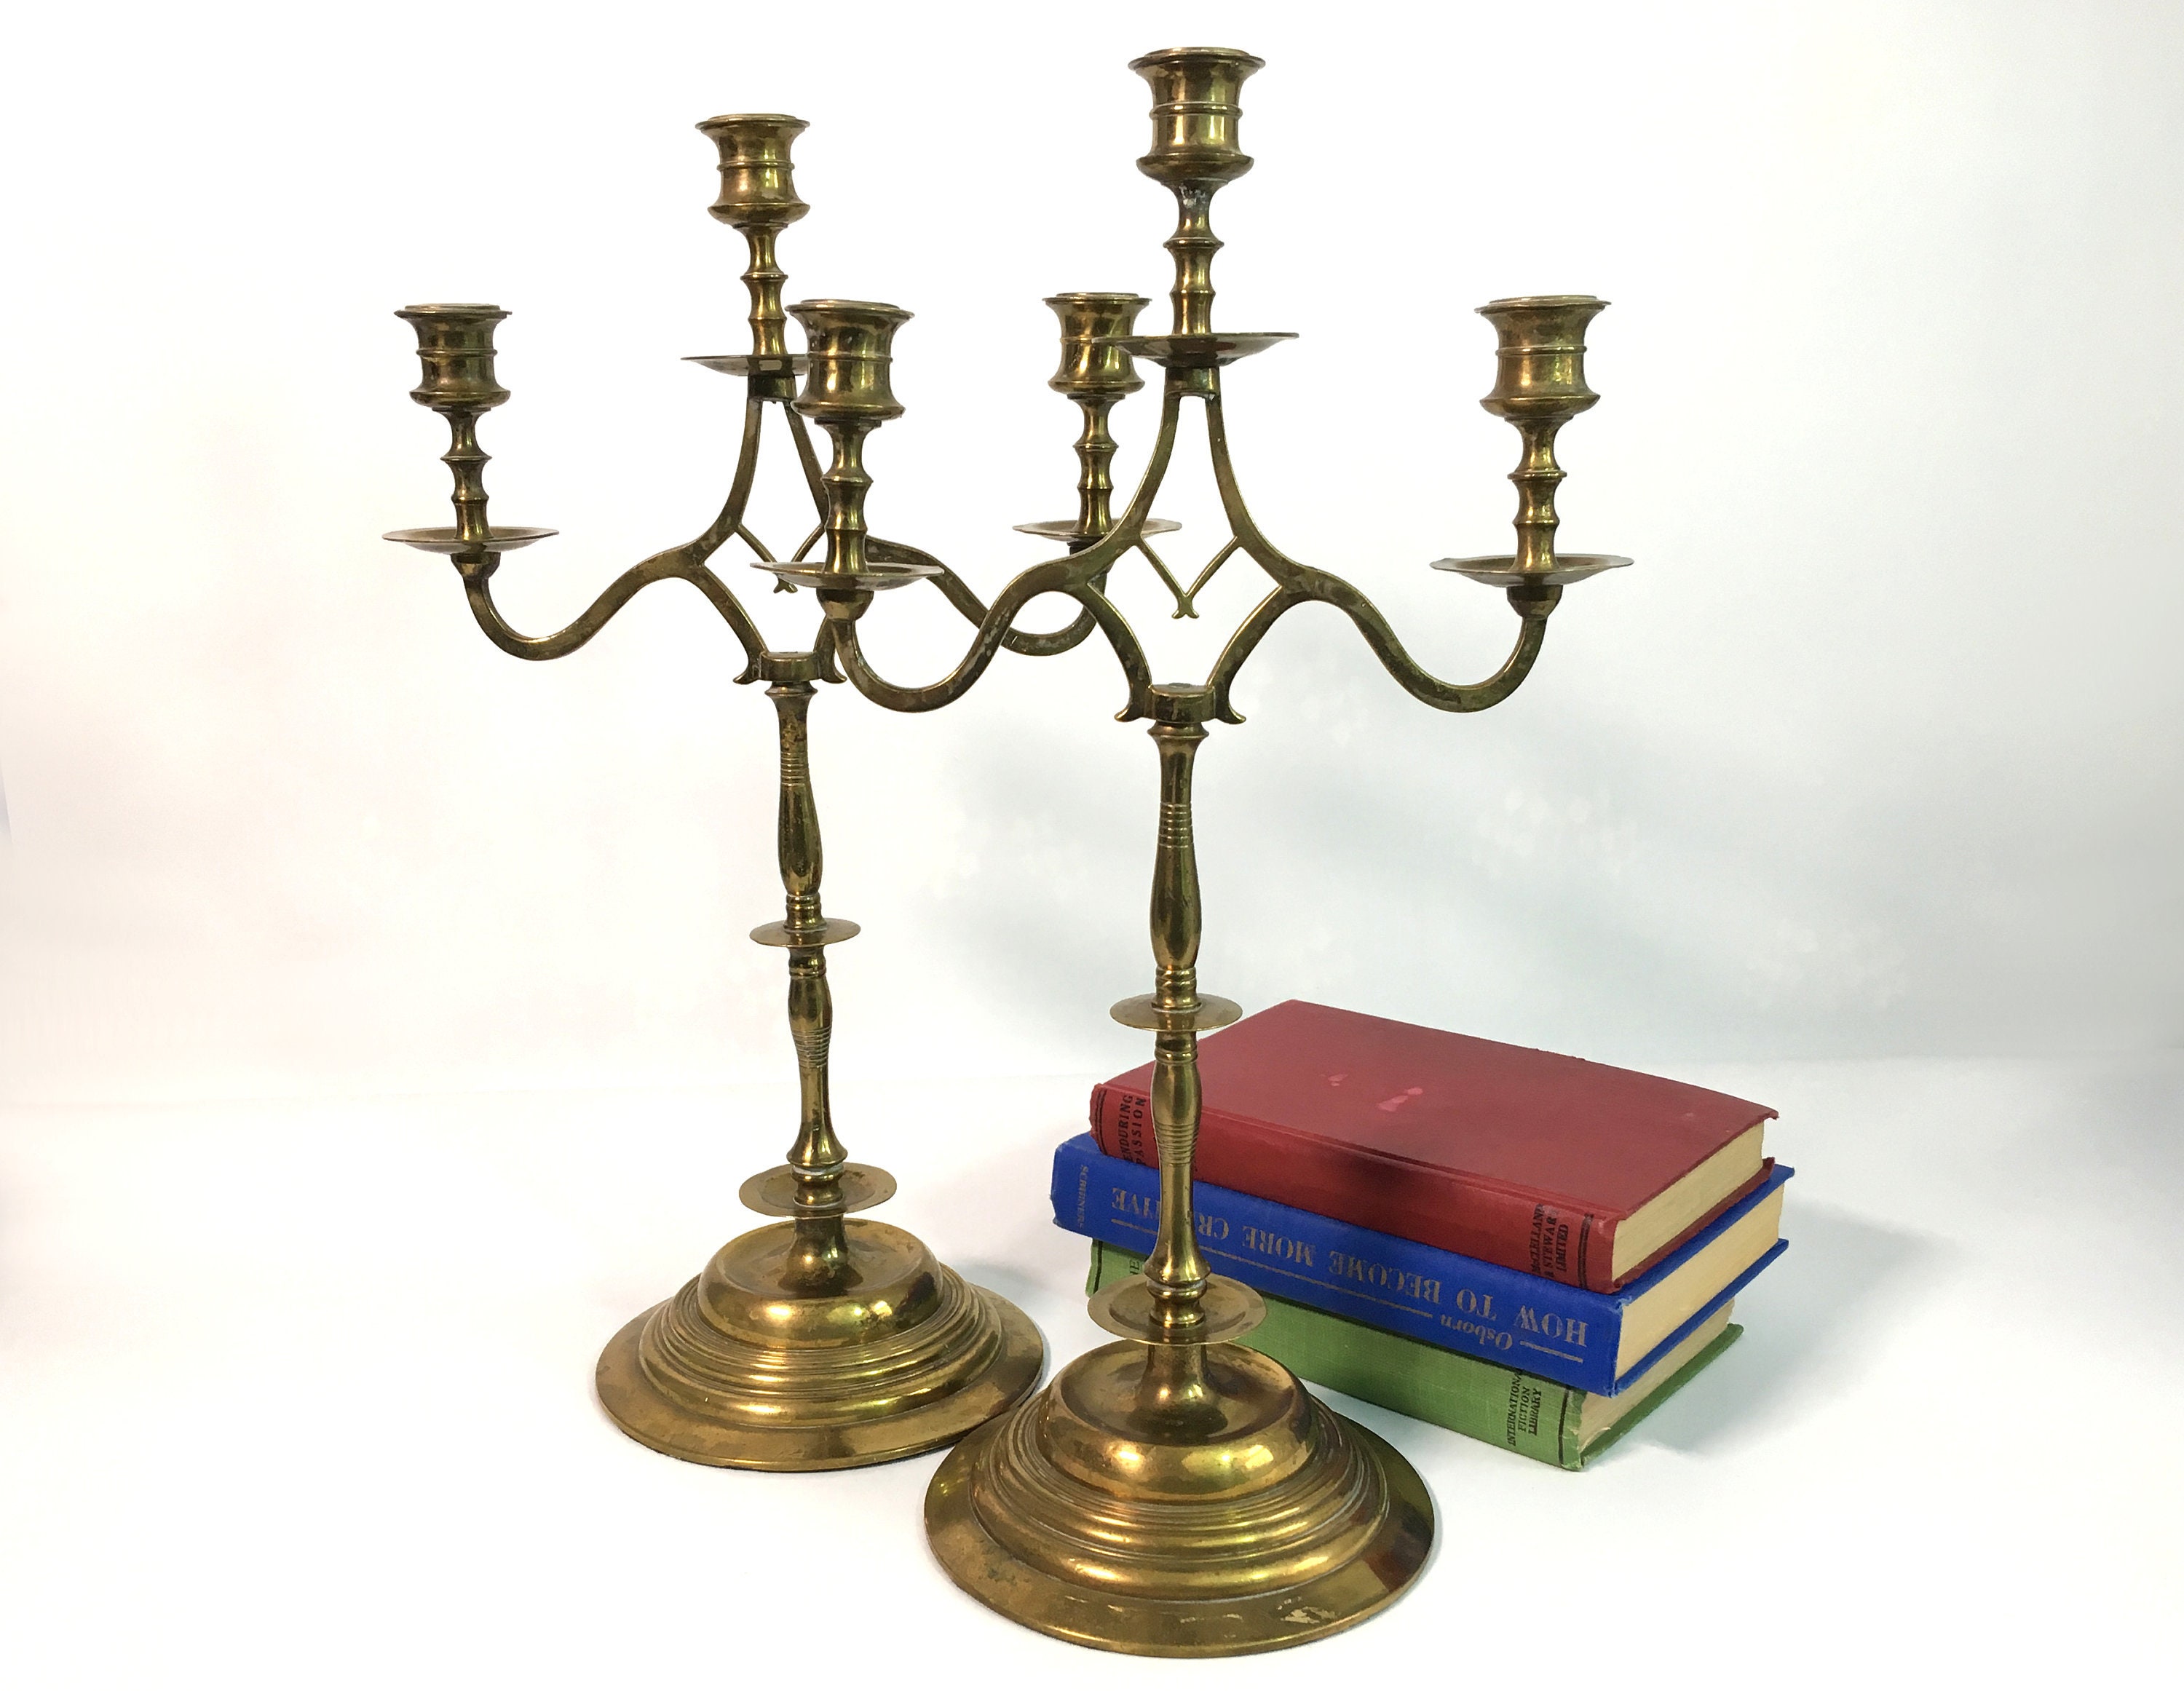 2 Vintage Tall Brass Candlesticks w/ 3 Candle holders Each - Ornate Retro  Brass Design - Mid century Pair Candelabra w/ Round Bases